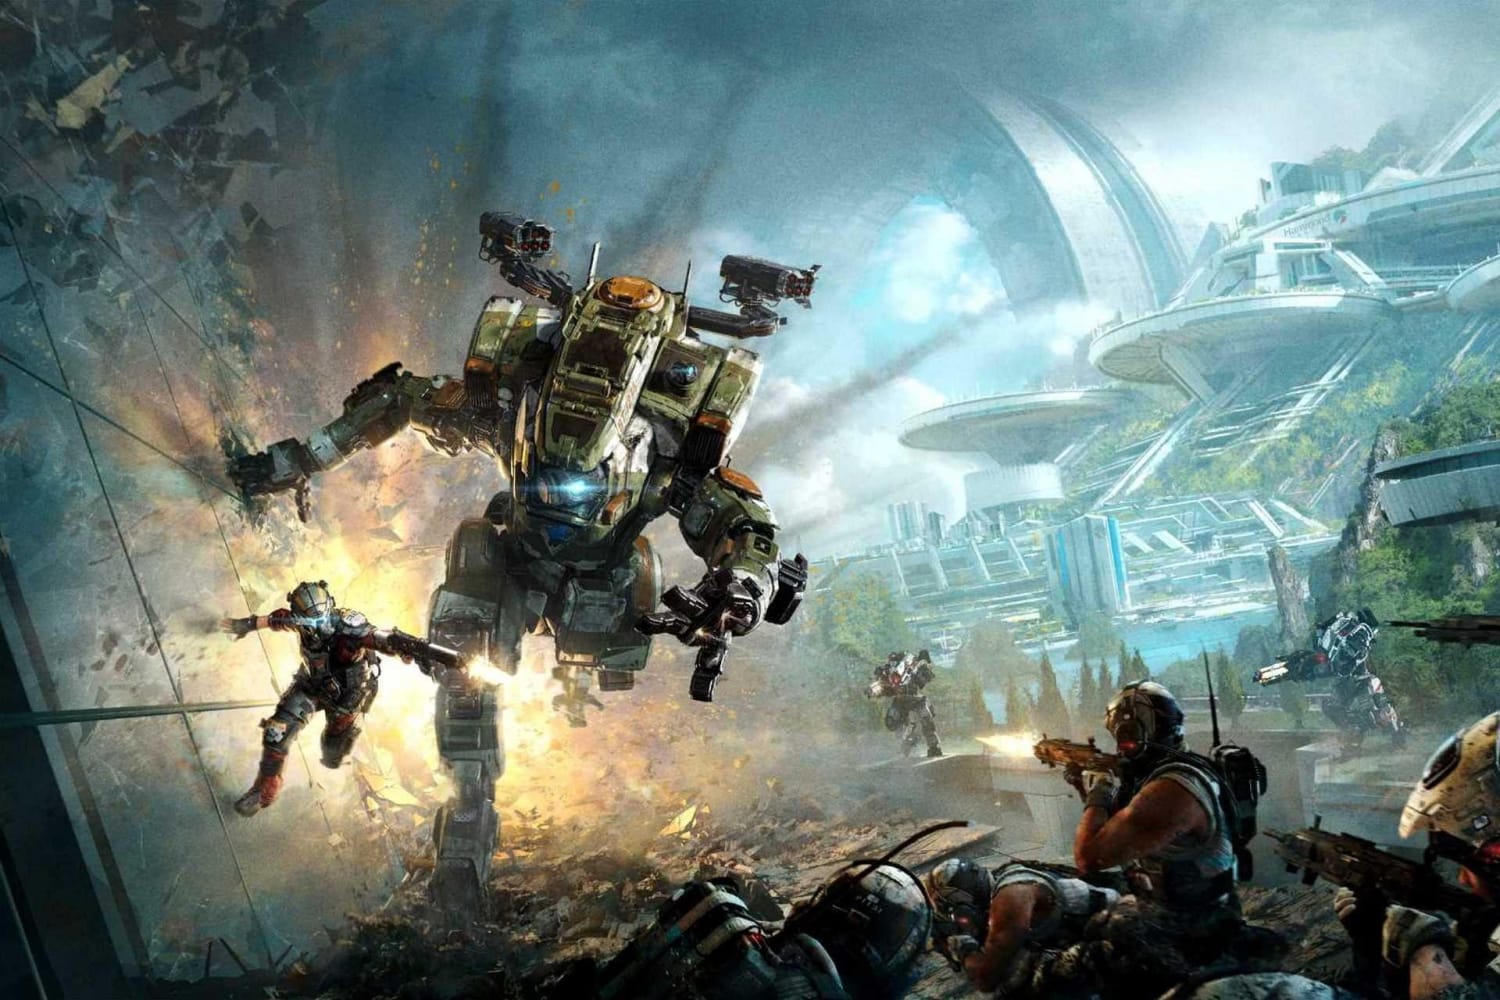 Titanfall 2 New Titan Arrives This Week, Double XP for All Modes